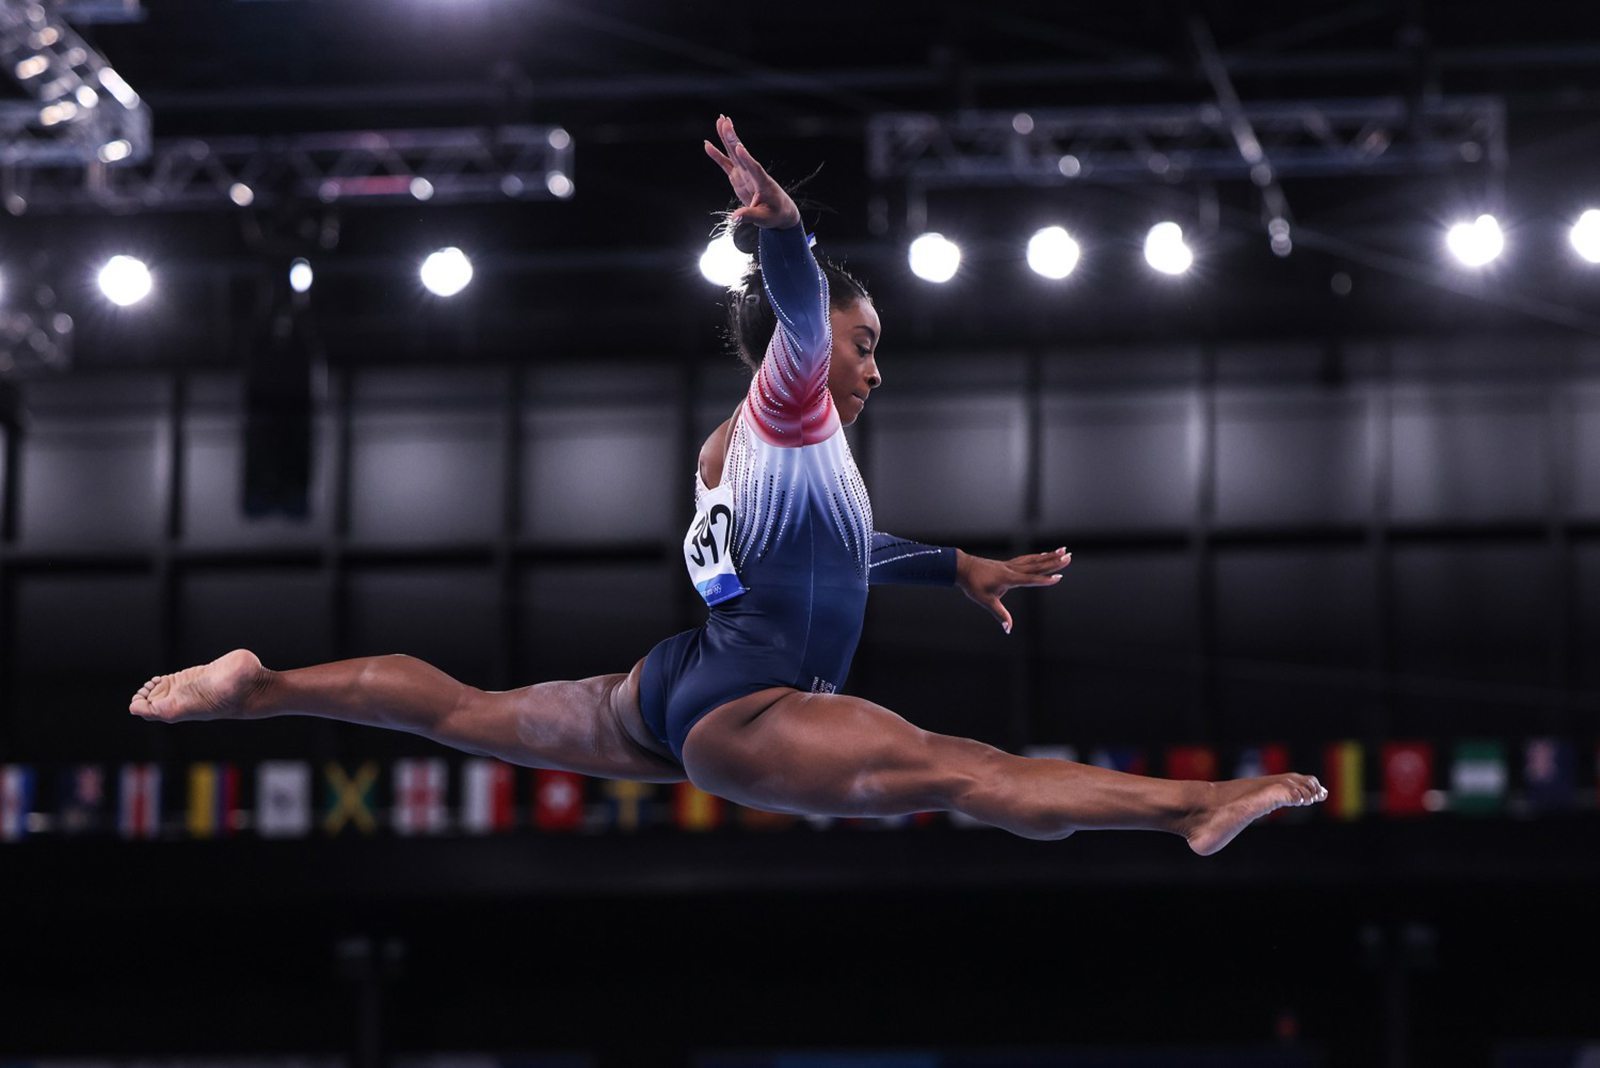 Simone Biles on her new role: mental health advocate